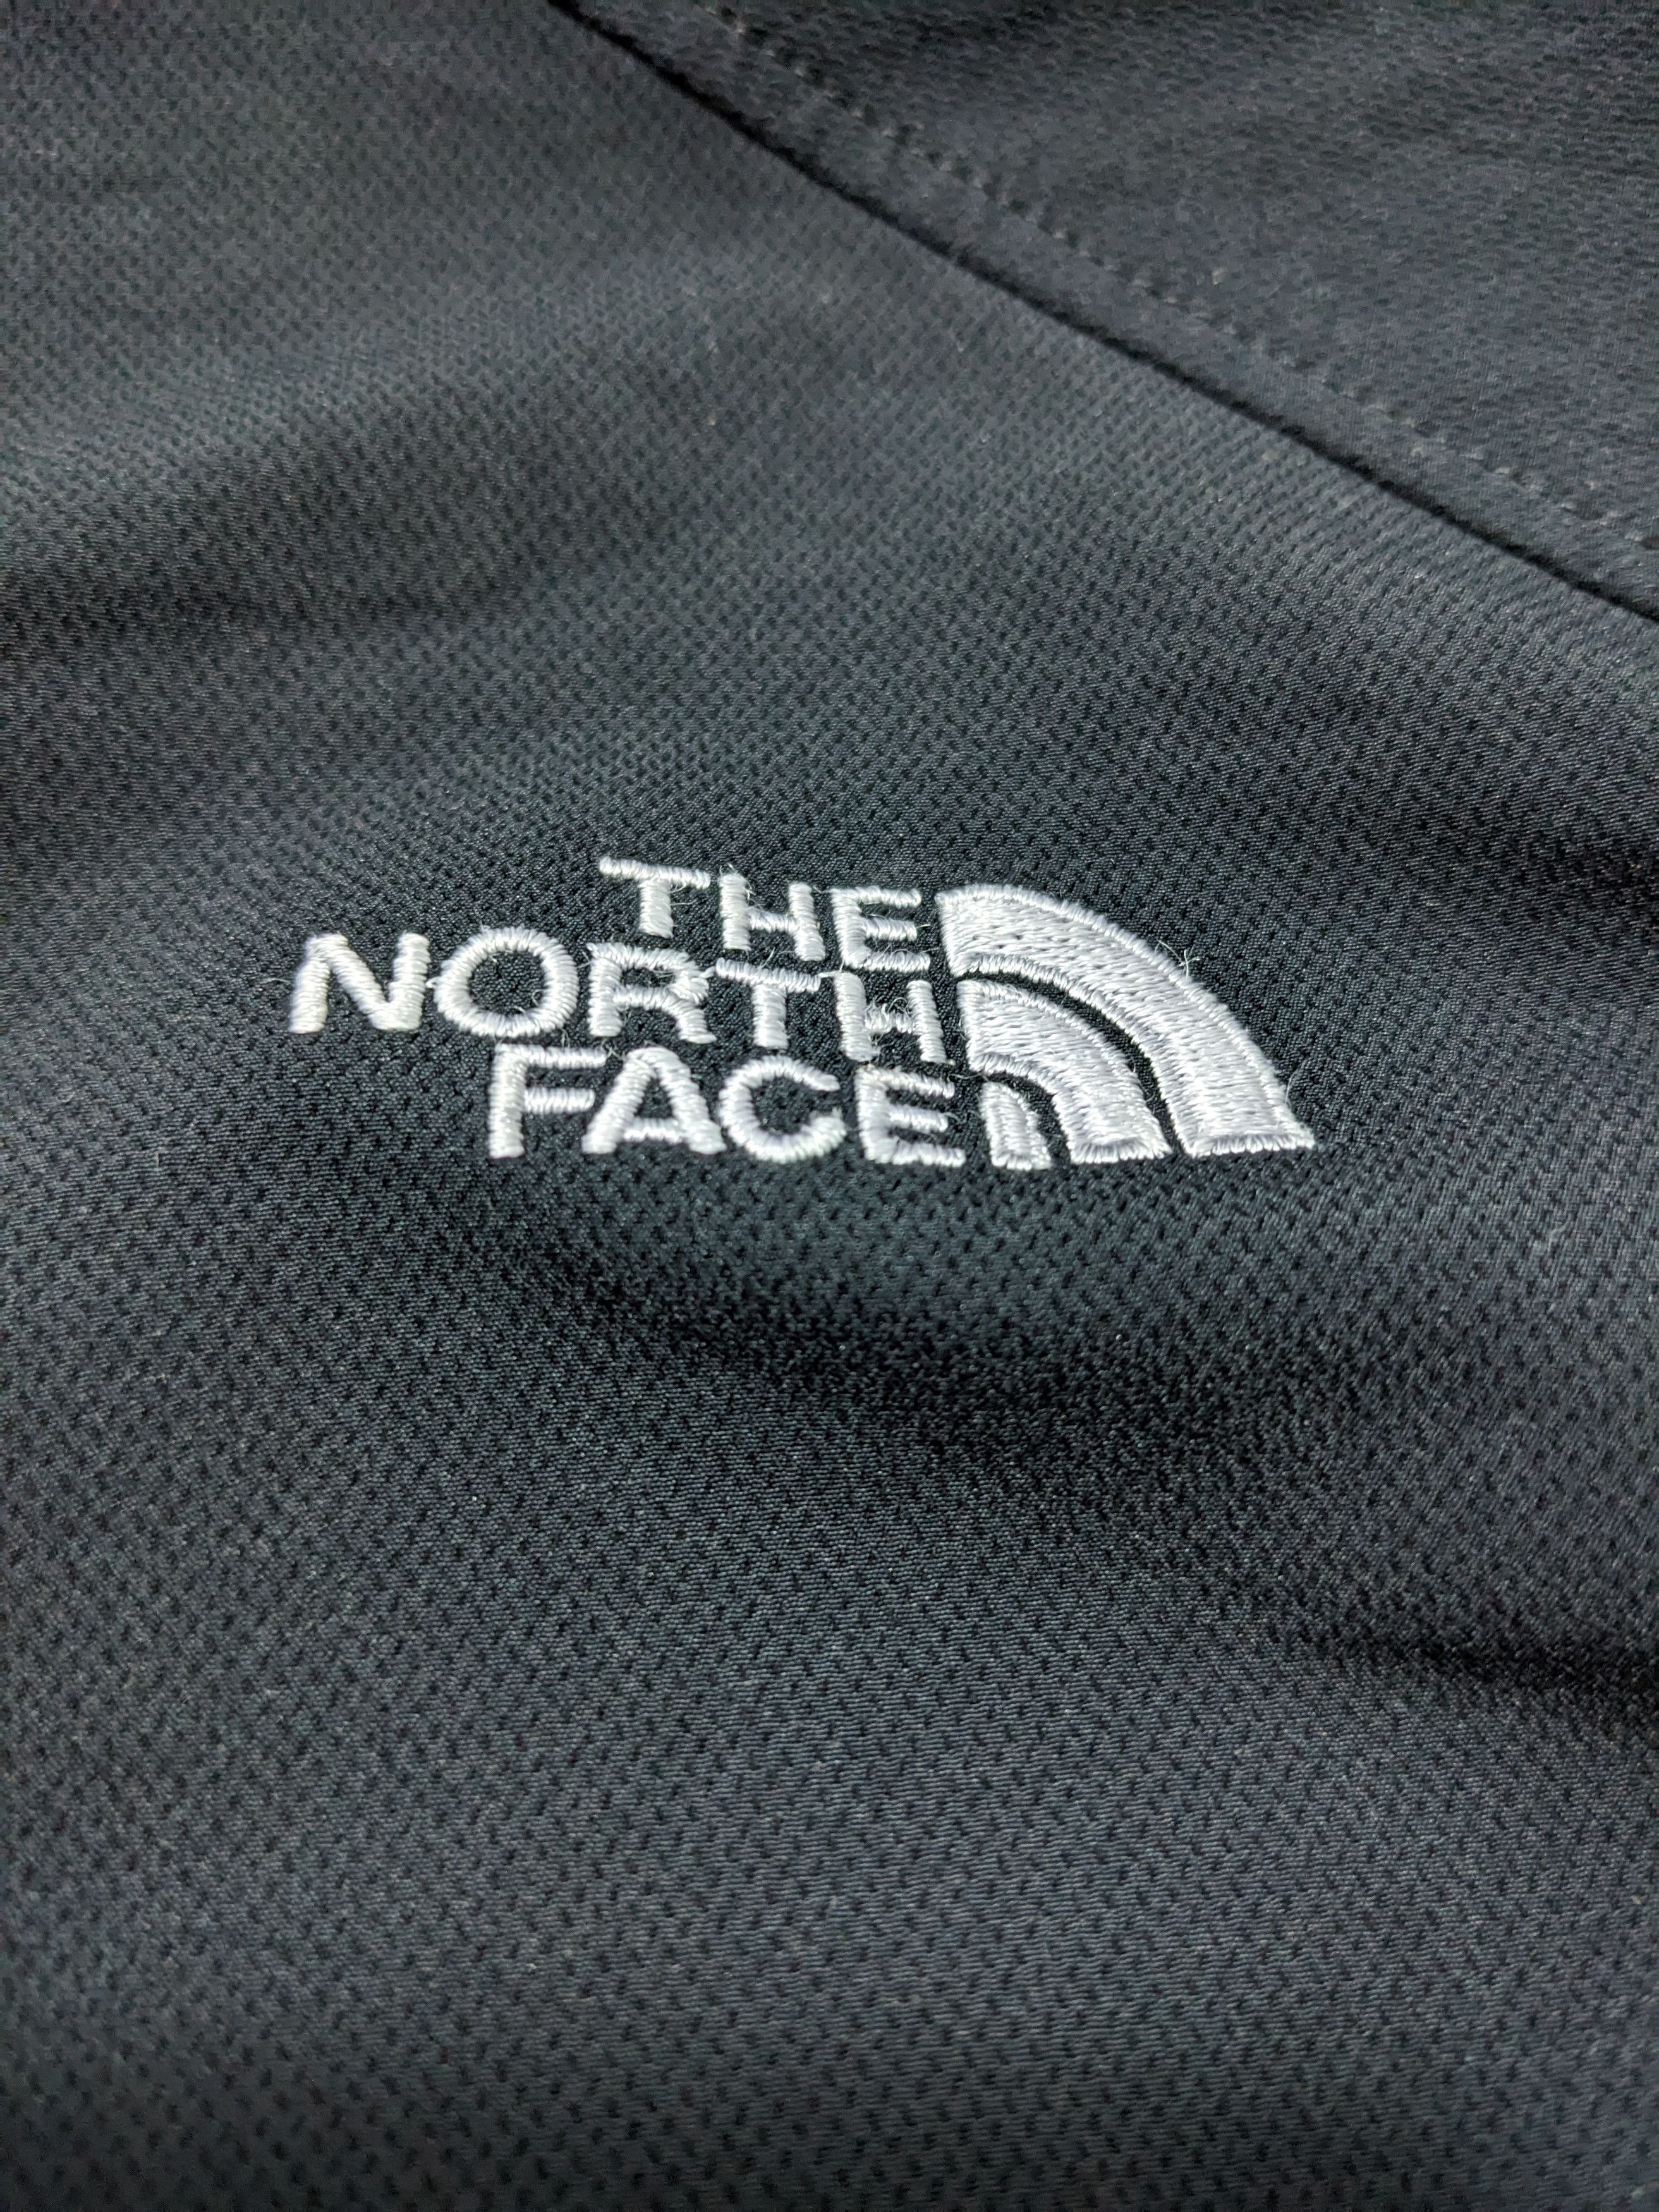 The North Face Soft Shell Black Vest - 7